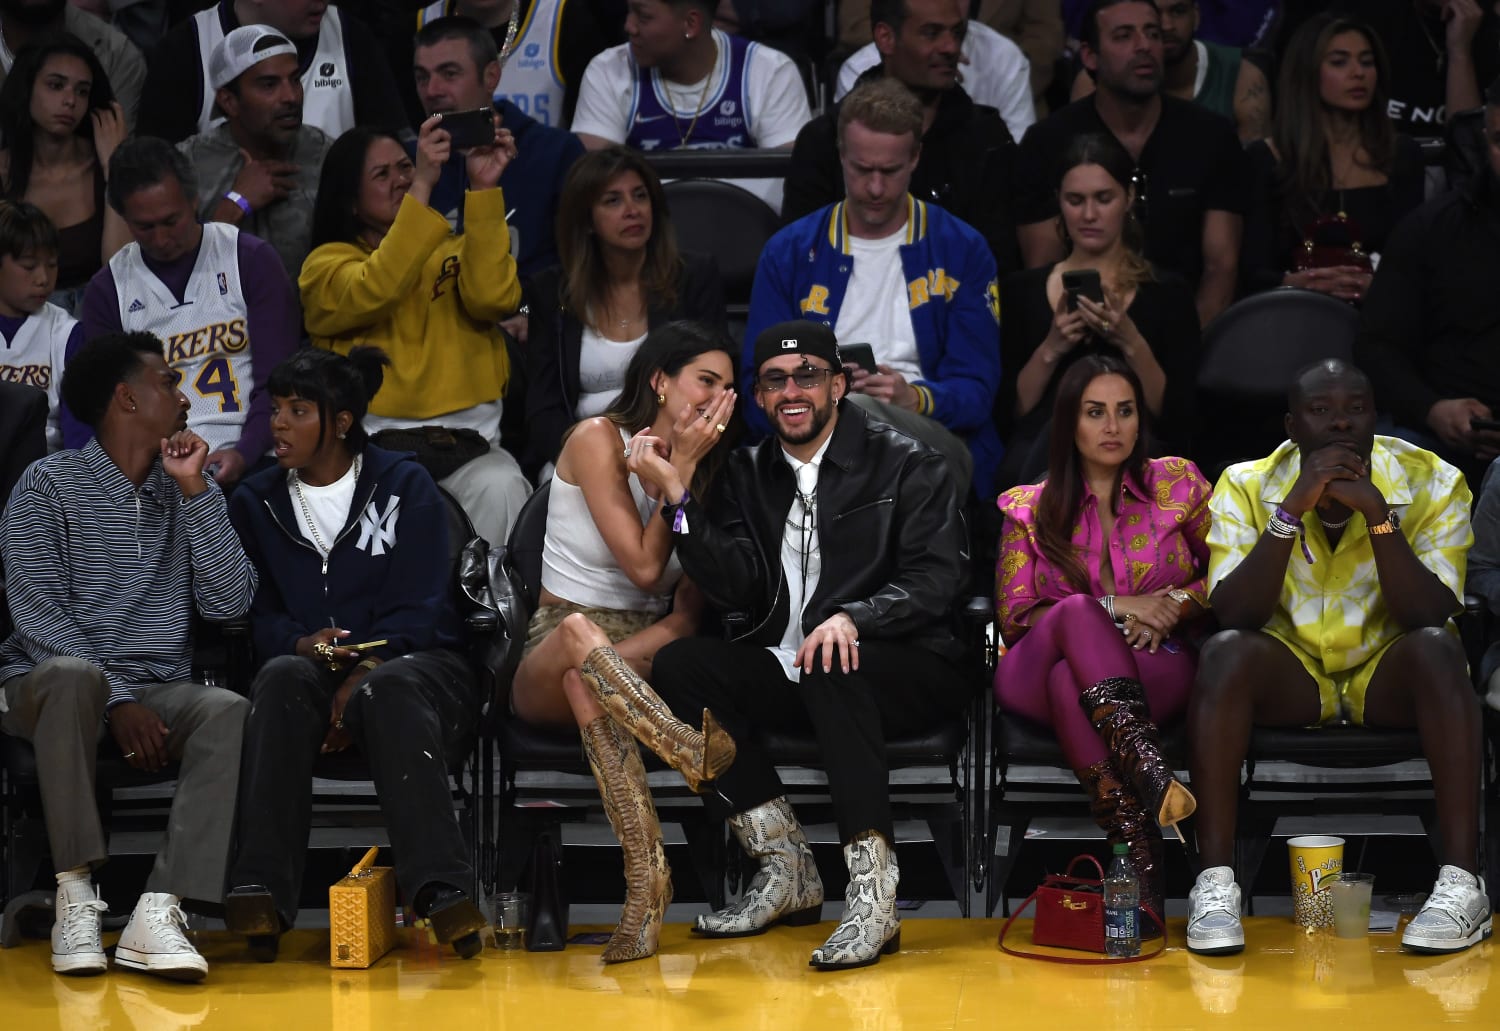 Celebs courtside at la lakers october 31st